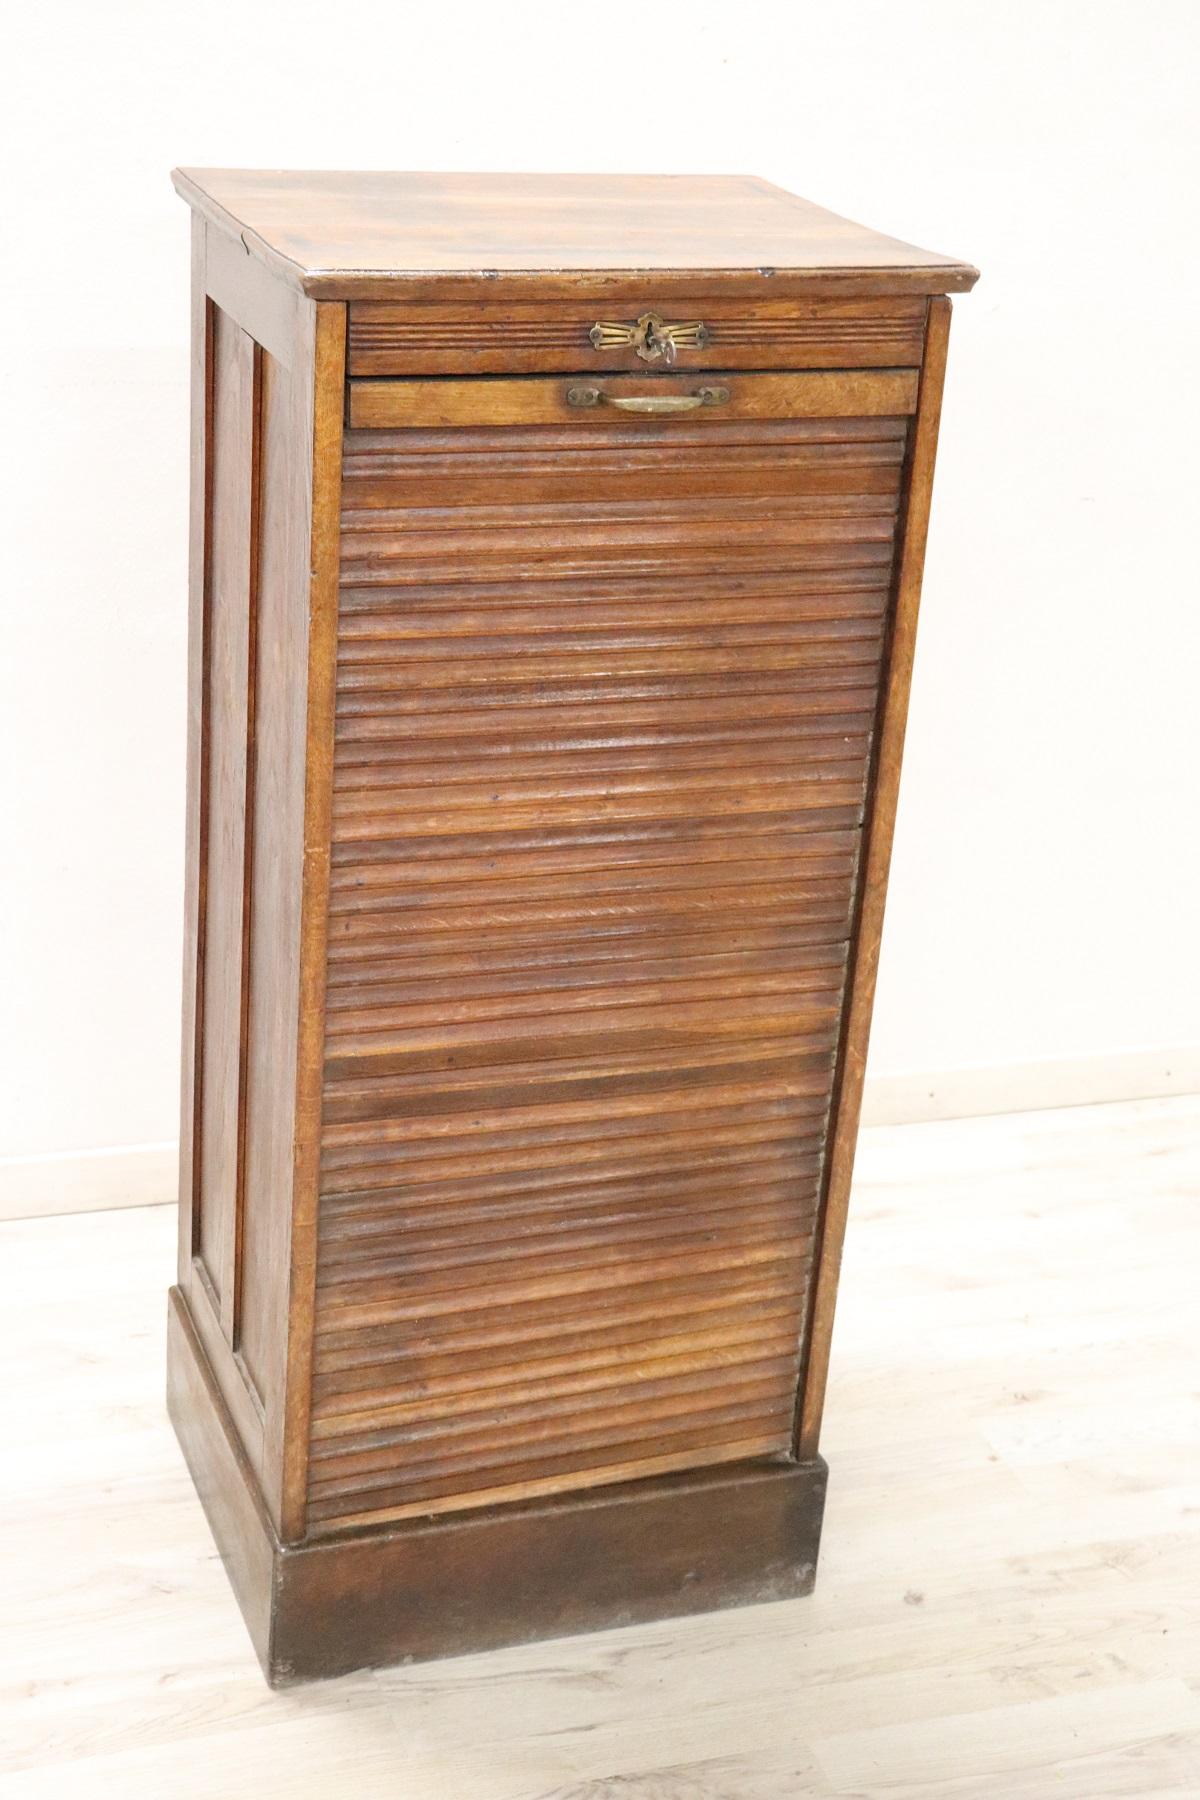 Italian cabinet, 1940s. High quality furniture in solid beechwood. The front door has a handmade sliding shutter.